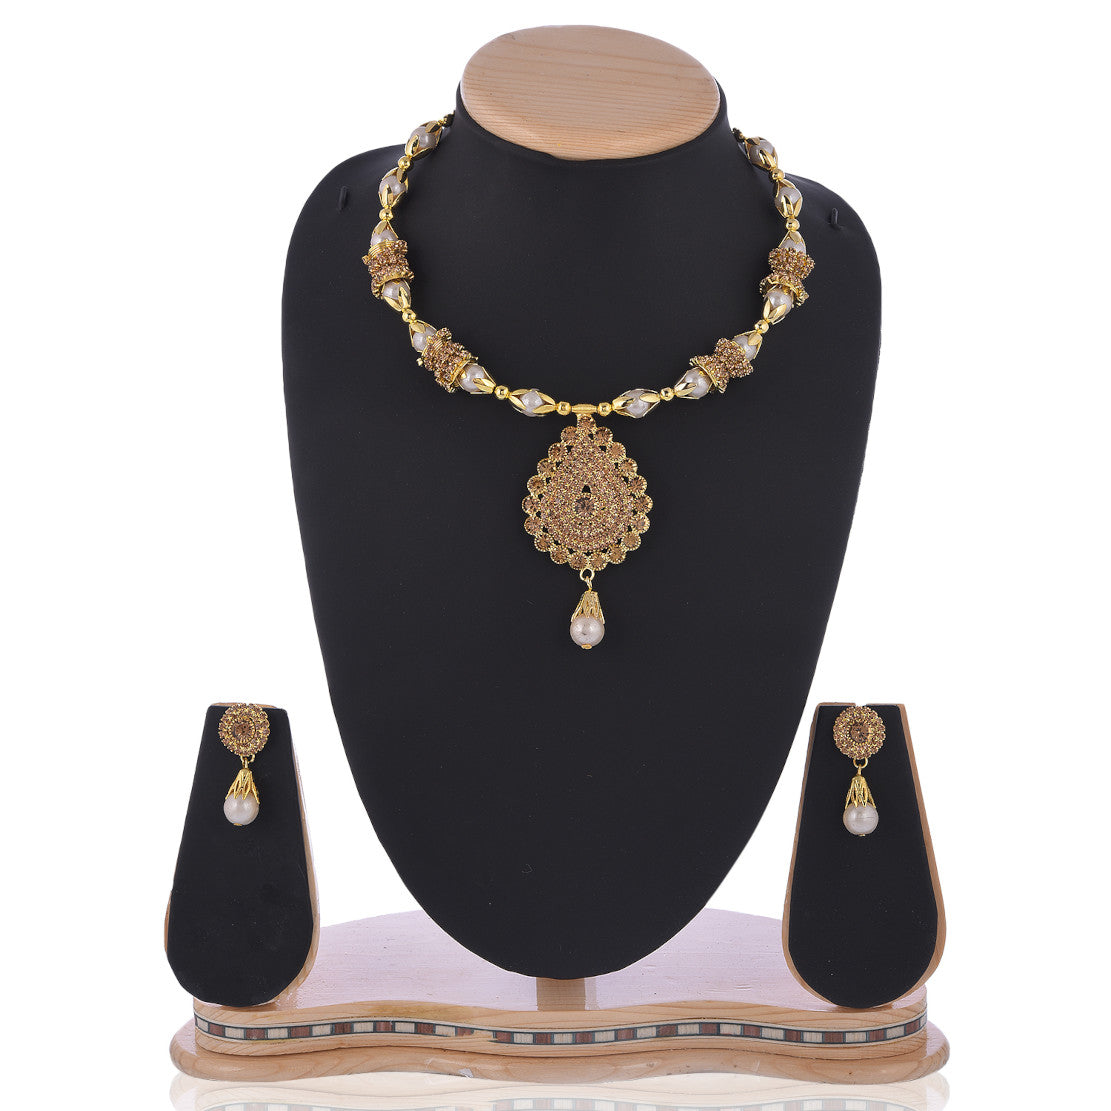 Necklace with Earrings for Women | Buy This Jewellery set Online from Mekkna